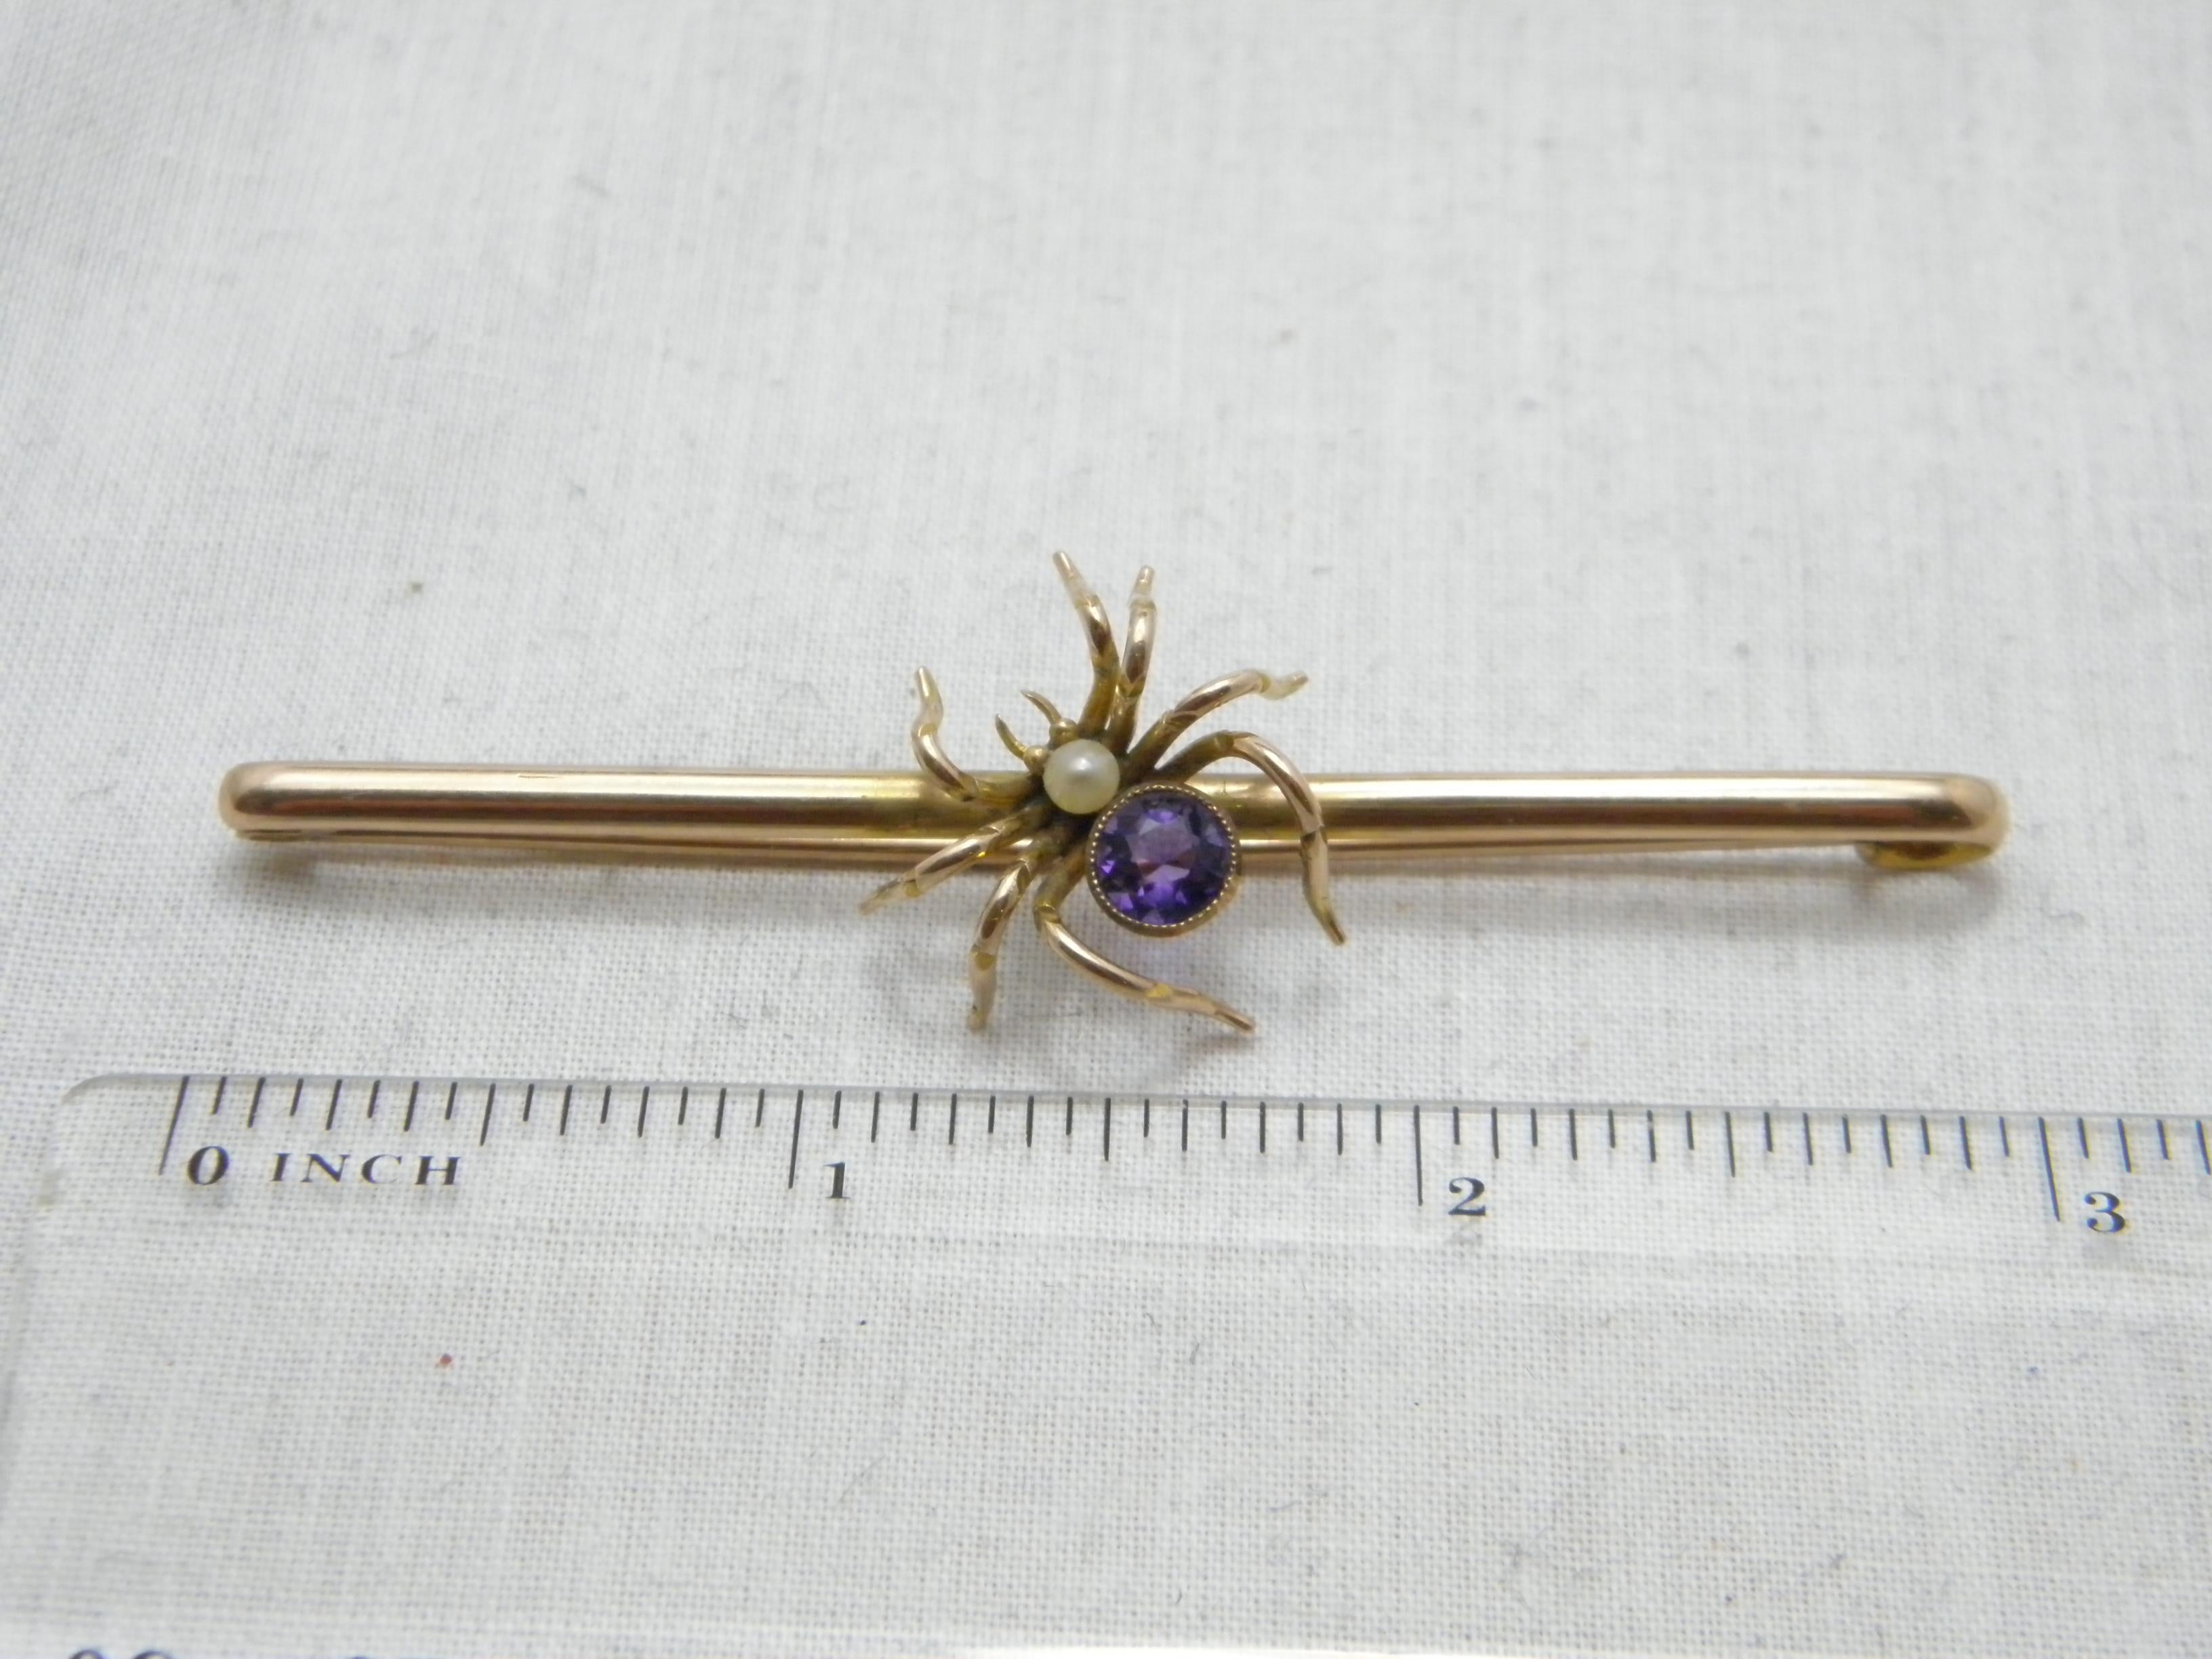 Antique 9ct Gold Large Amethyst Pearl Spider Bug Brooch Pin c1860 Heavy 6.4g 375 For Sale 5